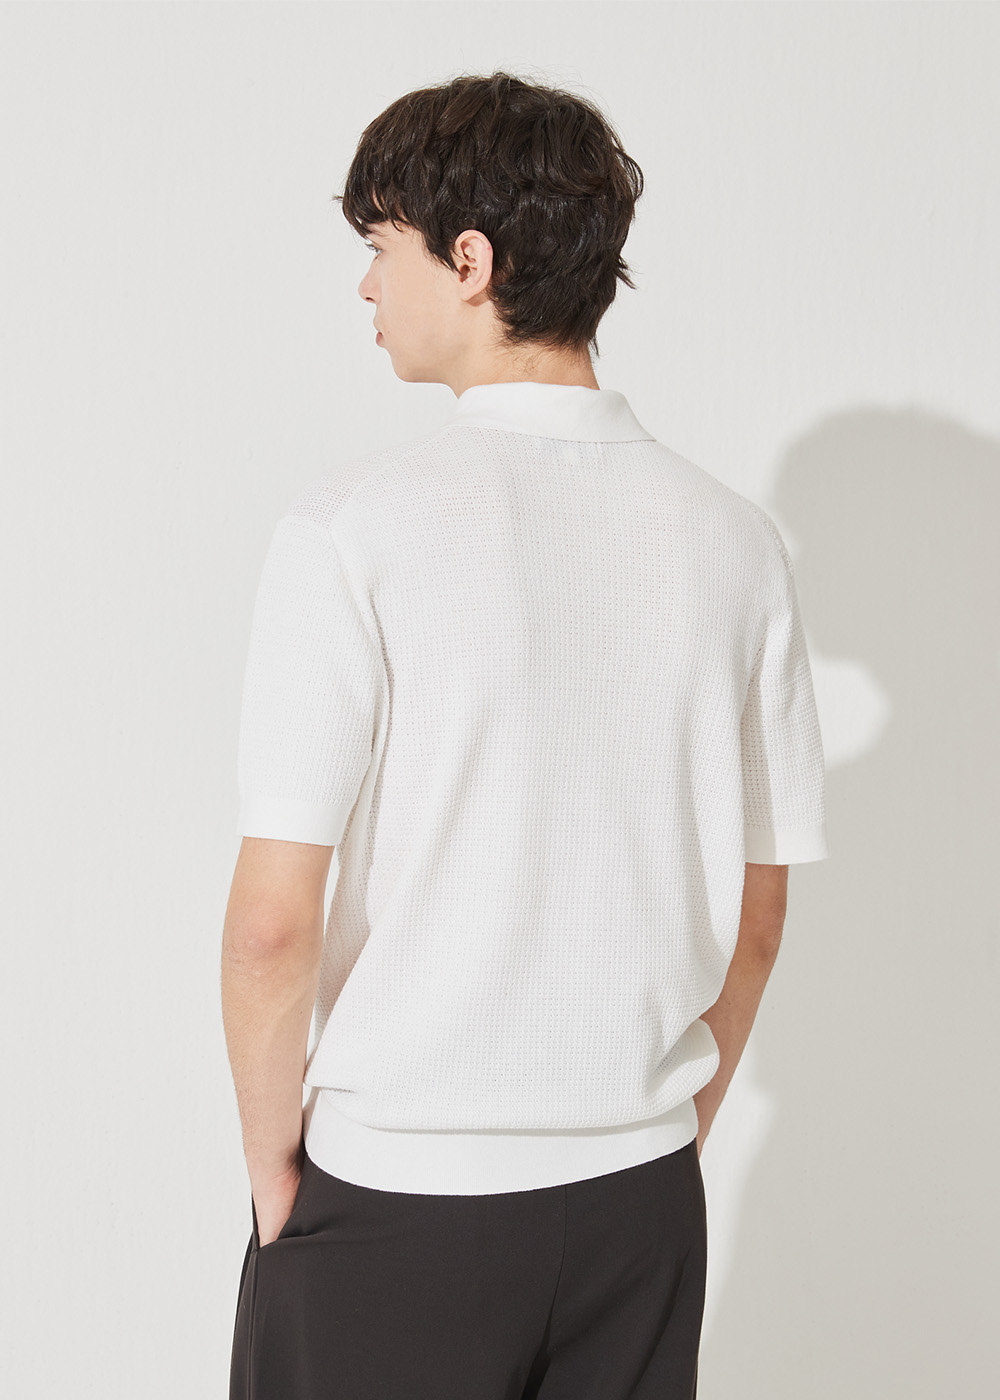 Cool cotton texture shirt  pullover (white)